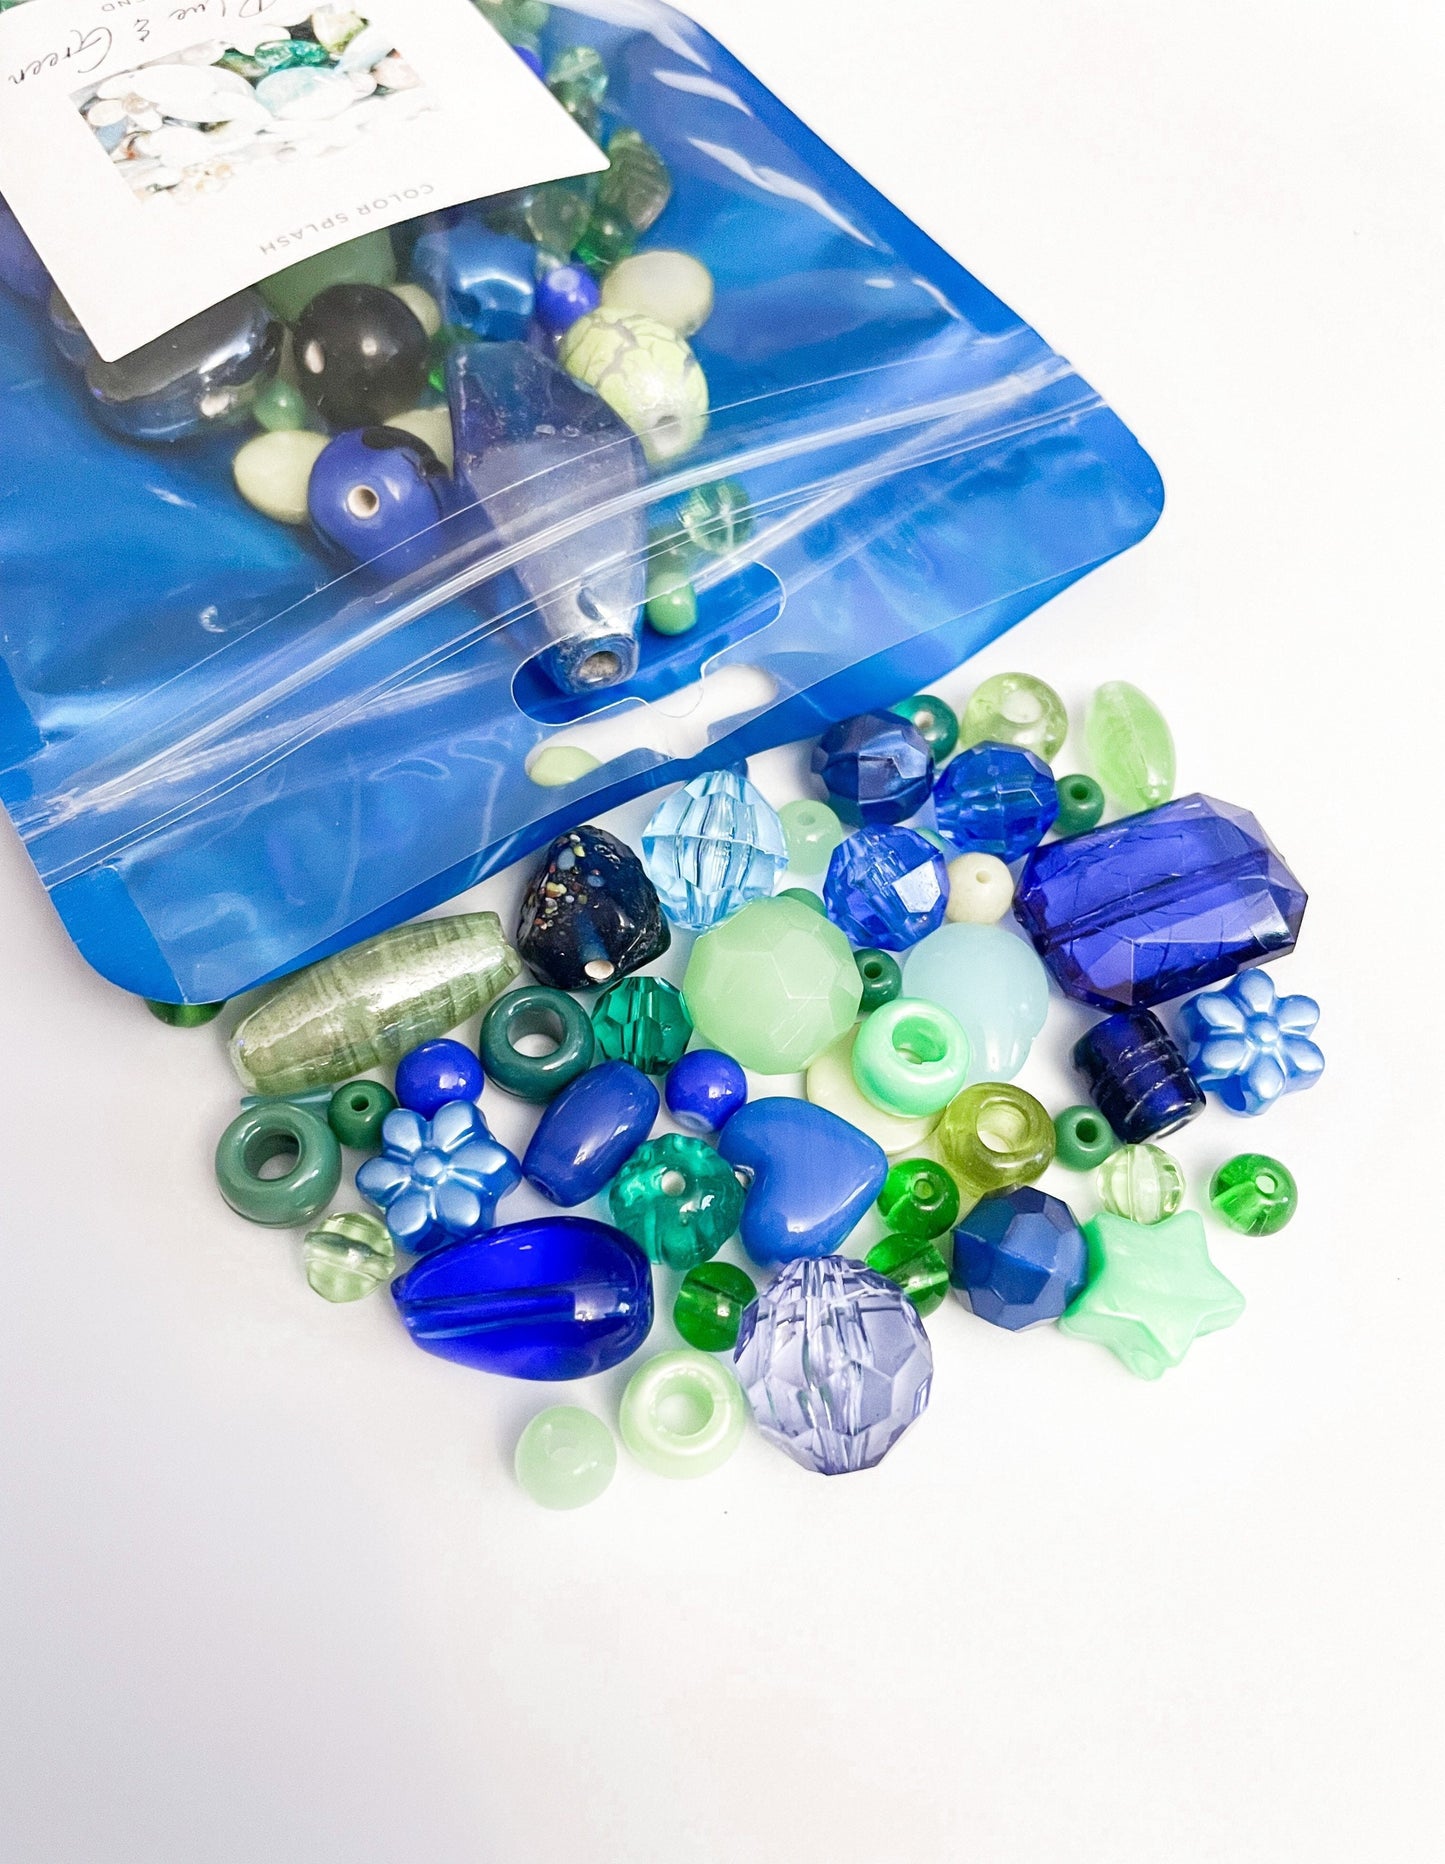 Sea Blue and Green Curated Assorted Variety Mix Bead Soup Blend (100g)